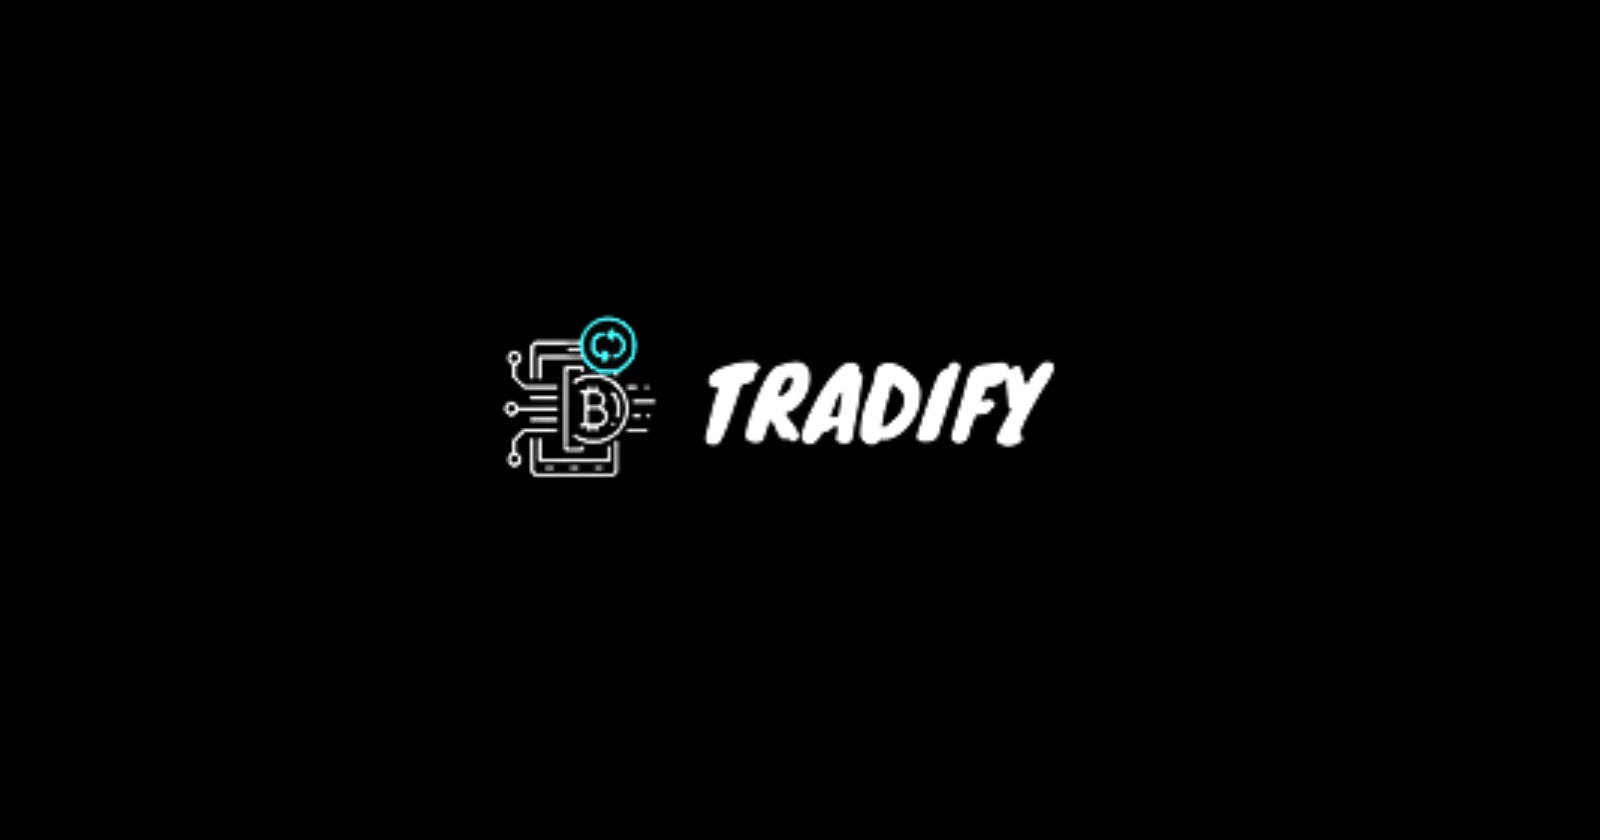 Tradify: Manage Your Stocks and Crypto Prices in One Place